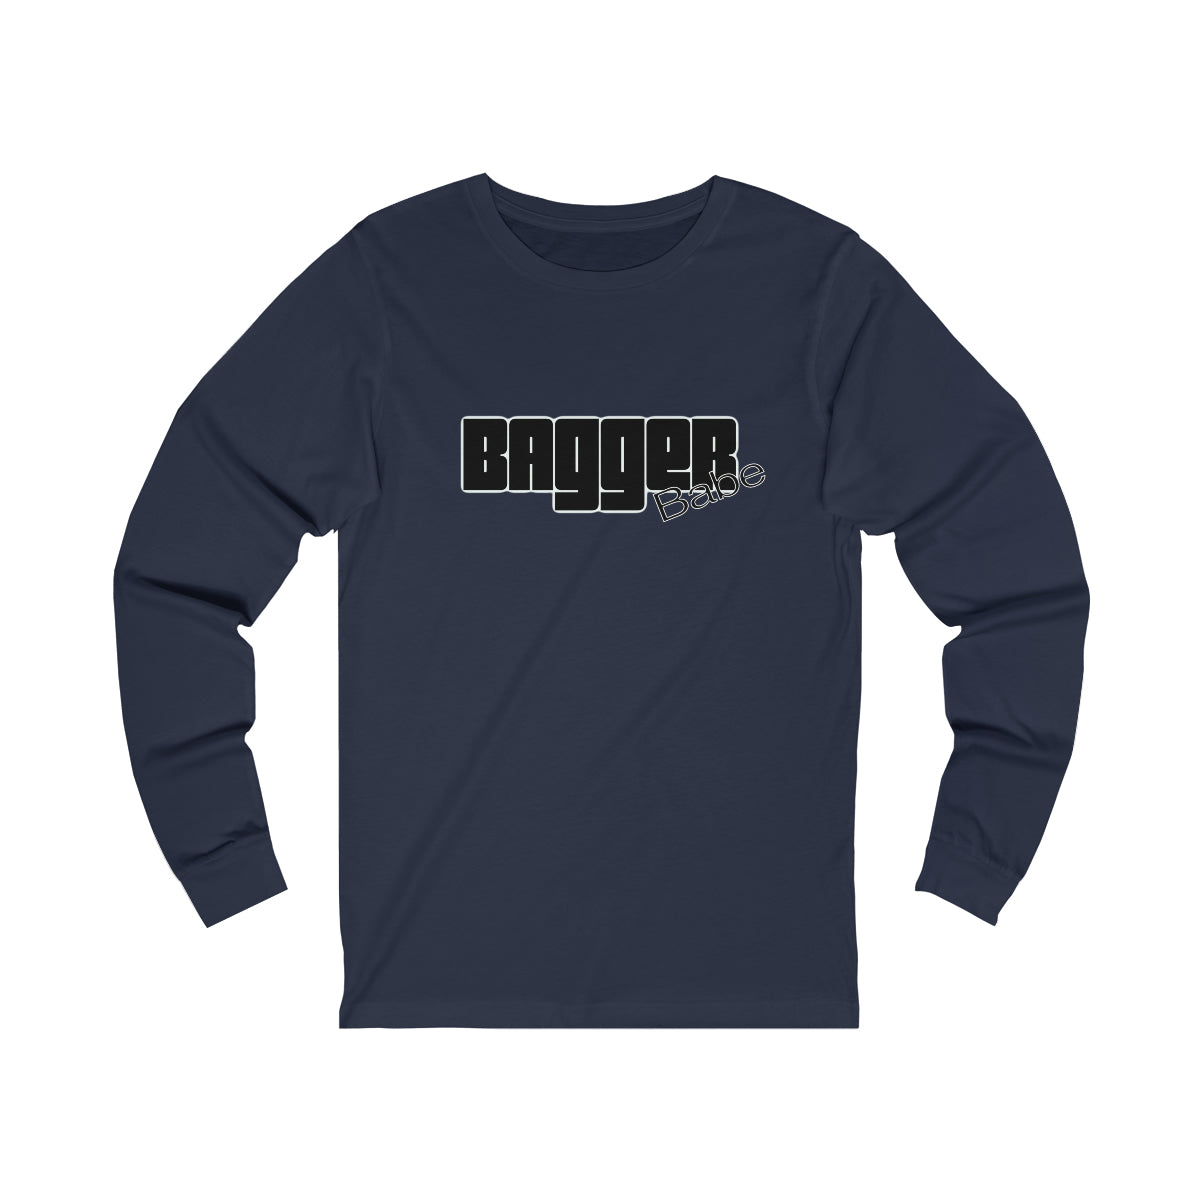 Bagger Babe (Black Letters) Unisex Jersey Long Sleeve Tee